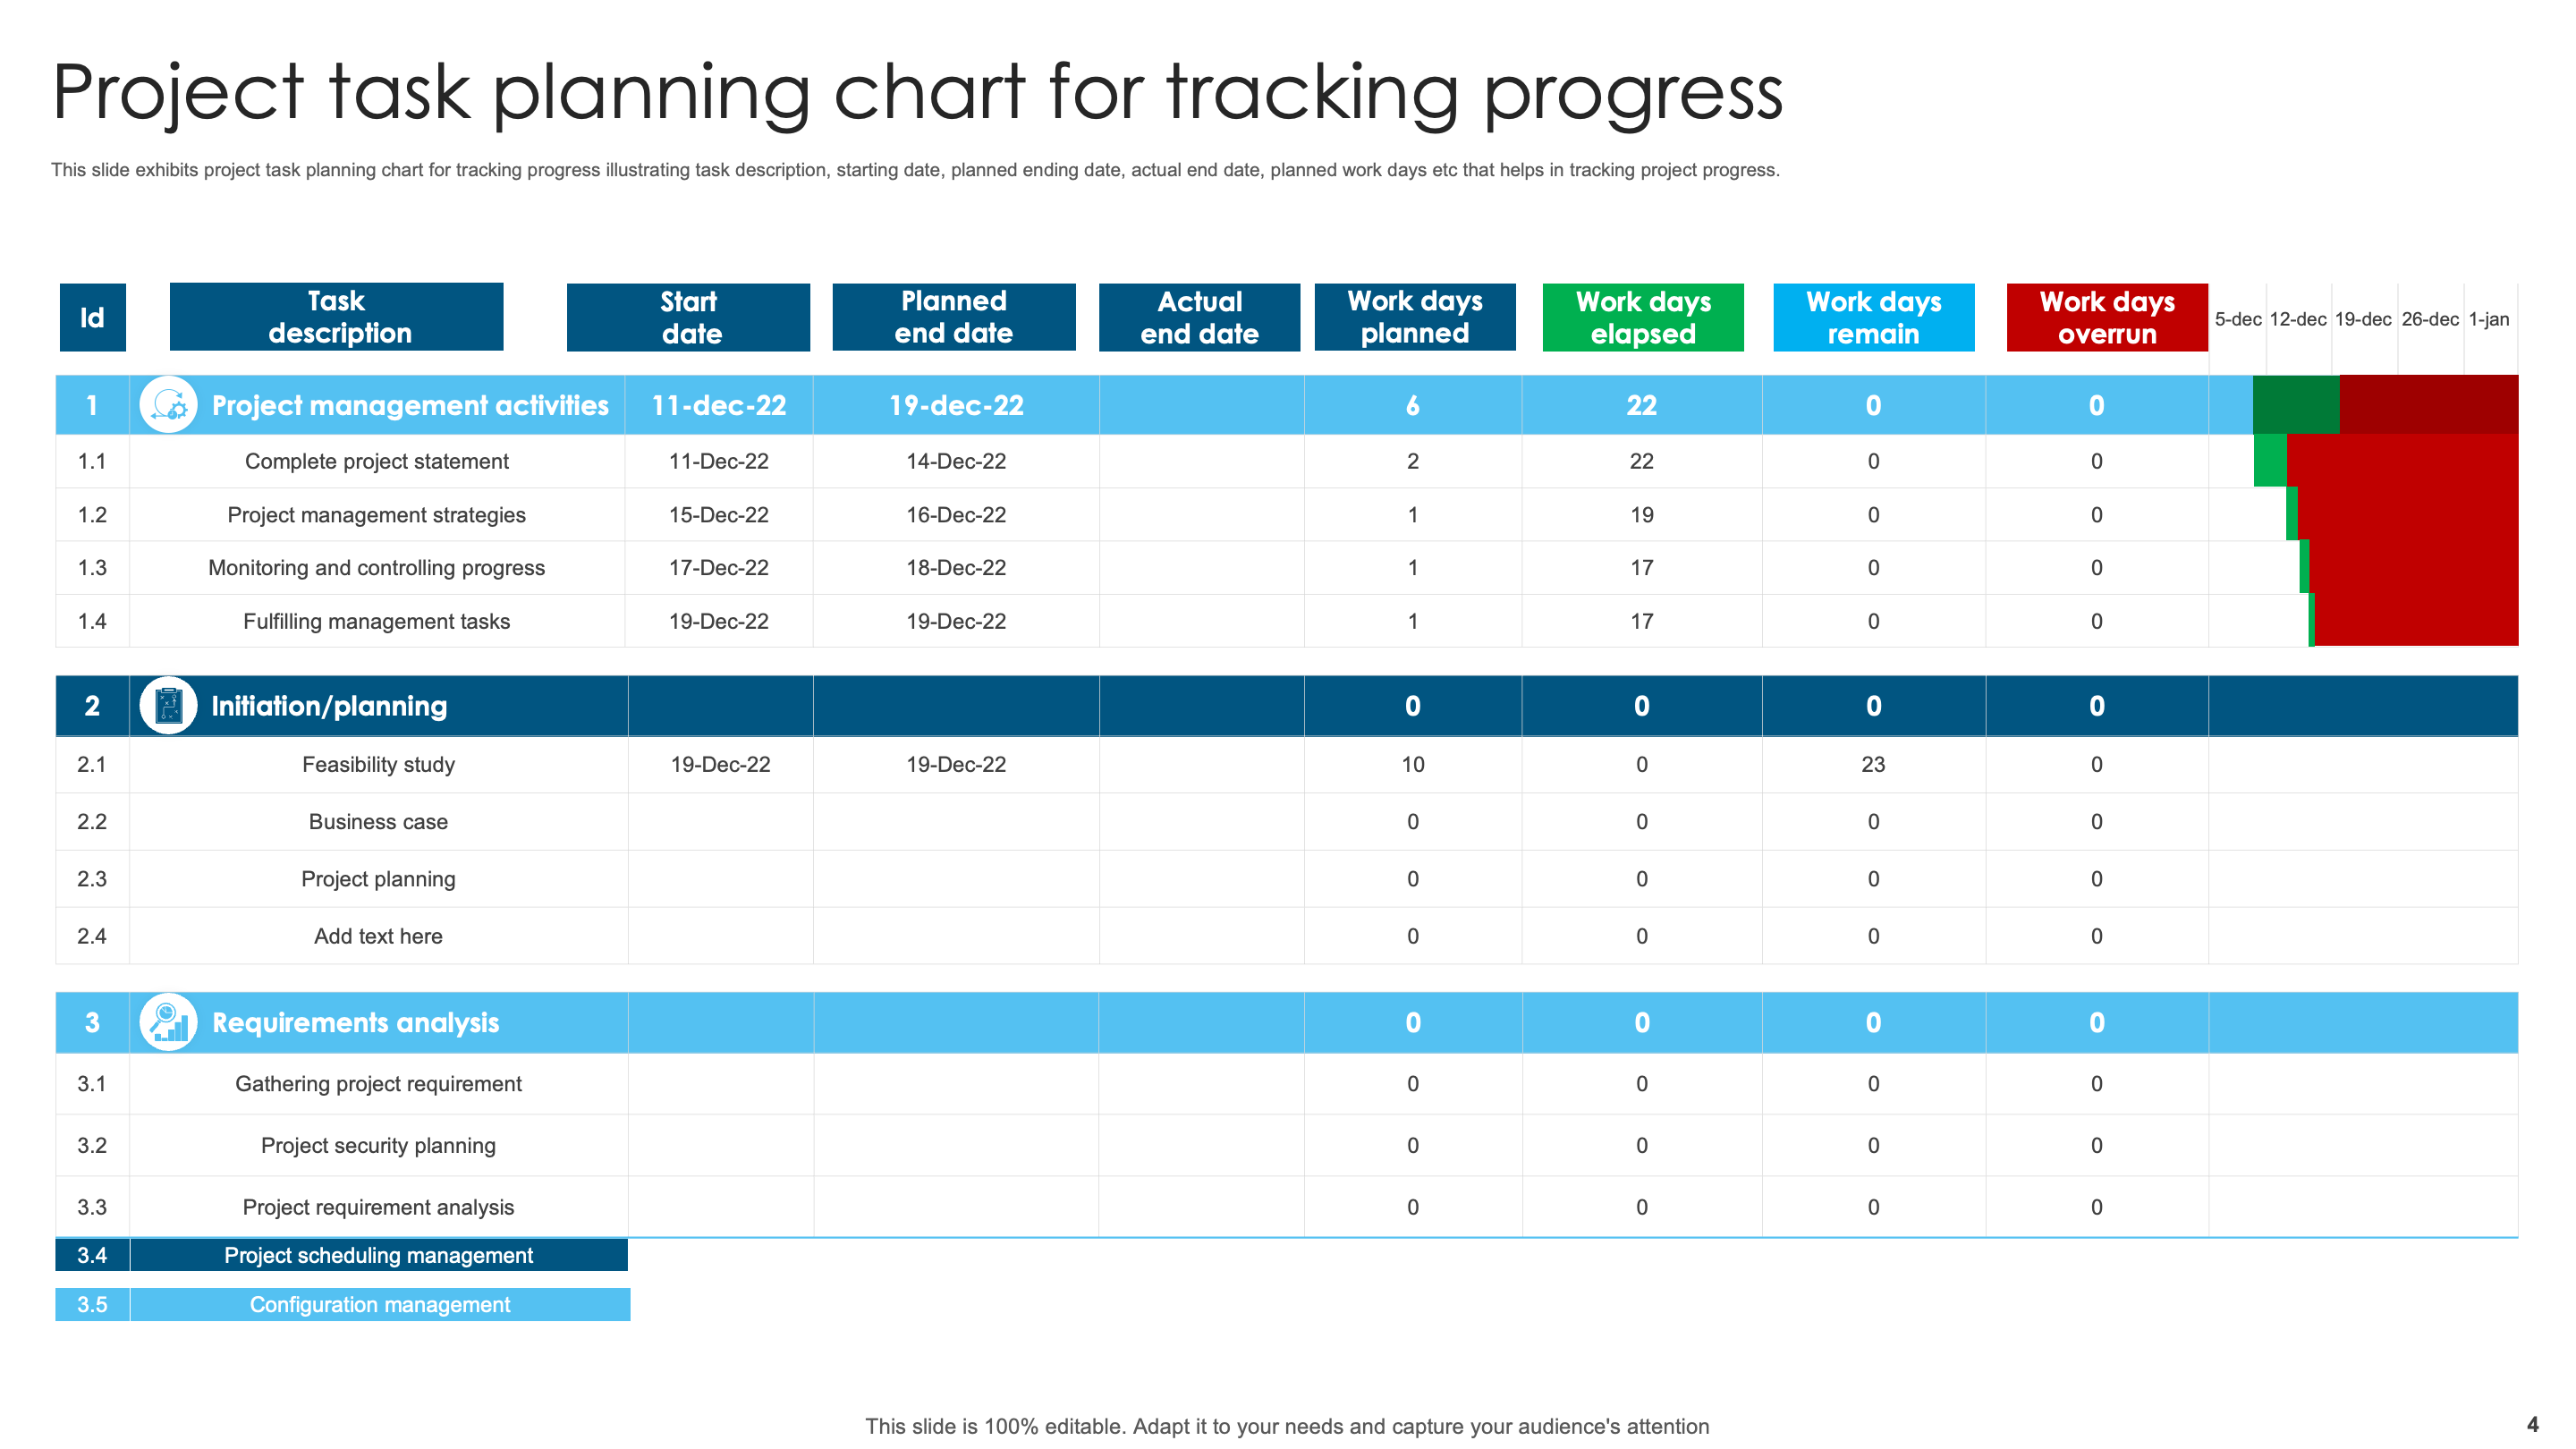 Project Task Planning Chart for Tracking Progress